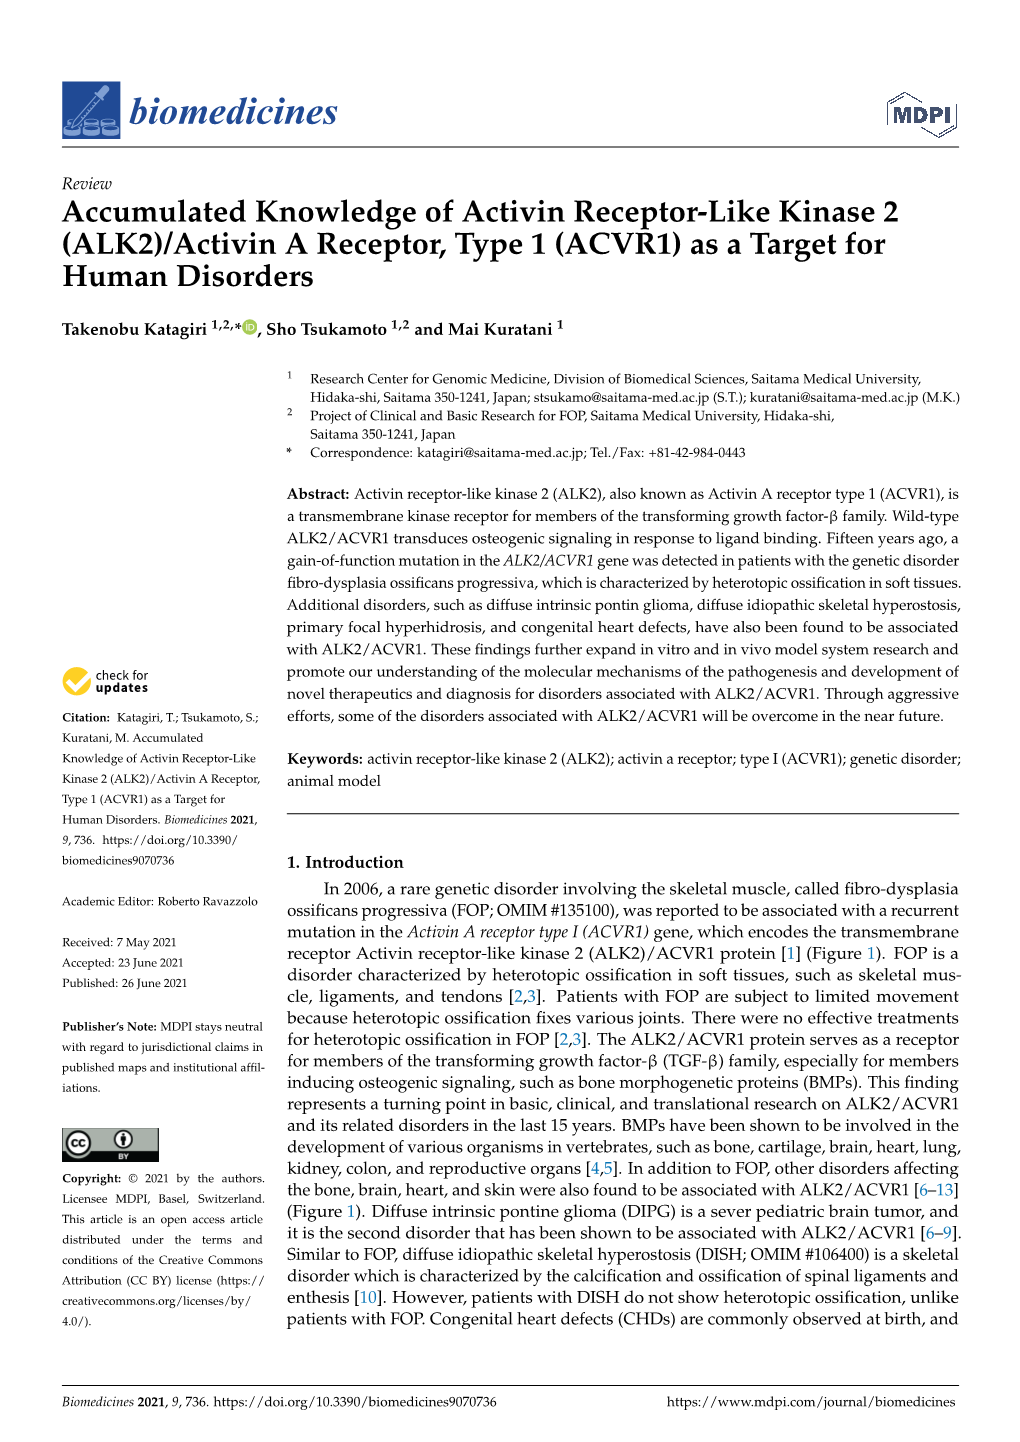 (ALK2)/Activin a Receptor, Type 1 (ACVR1) As a Target for Human Disorders